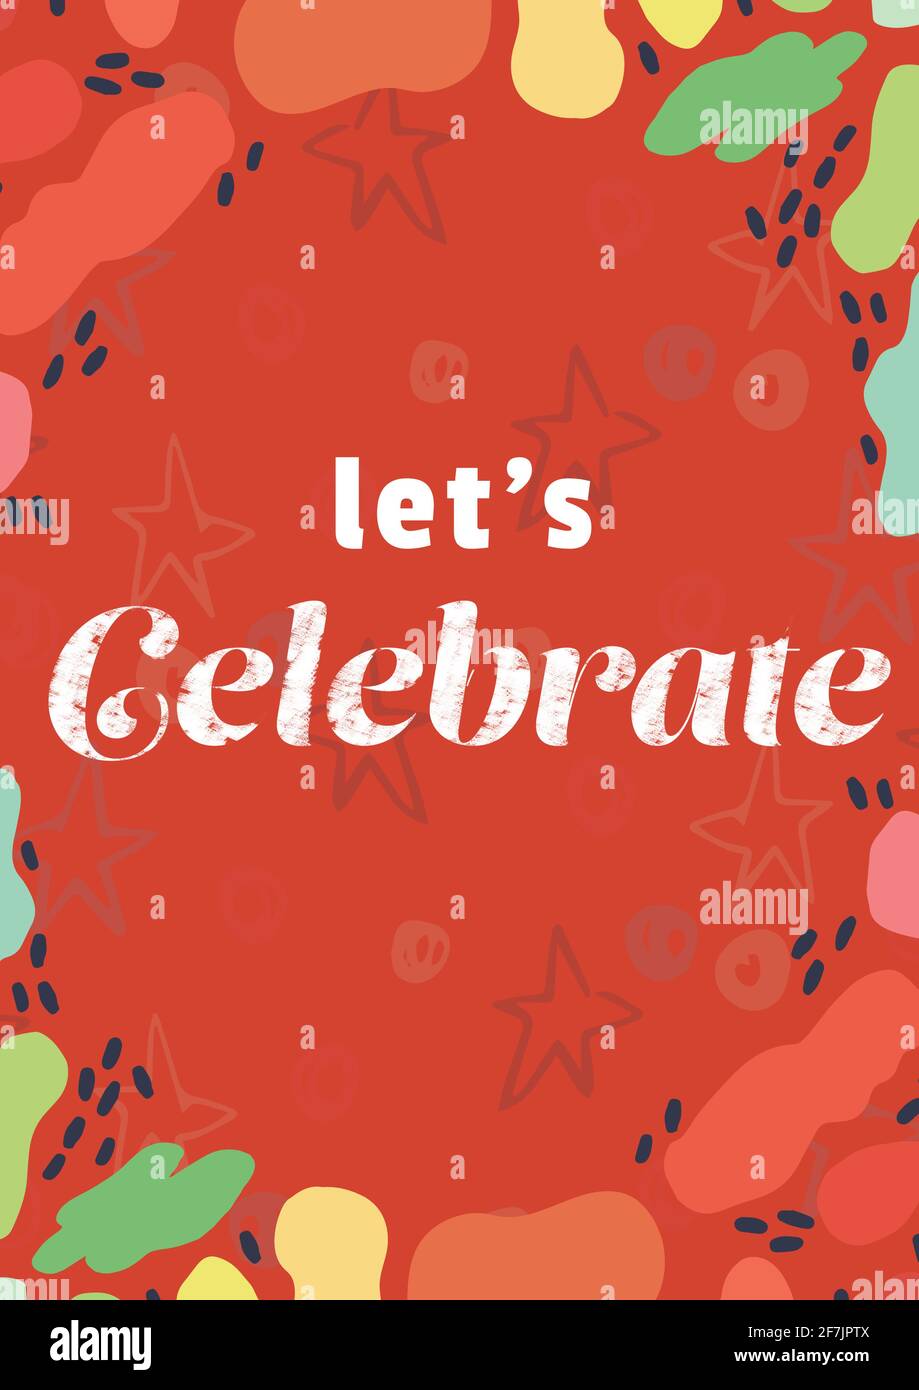 Let's celebrate written in white with colourful shapes on invite with red background Stock Photo